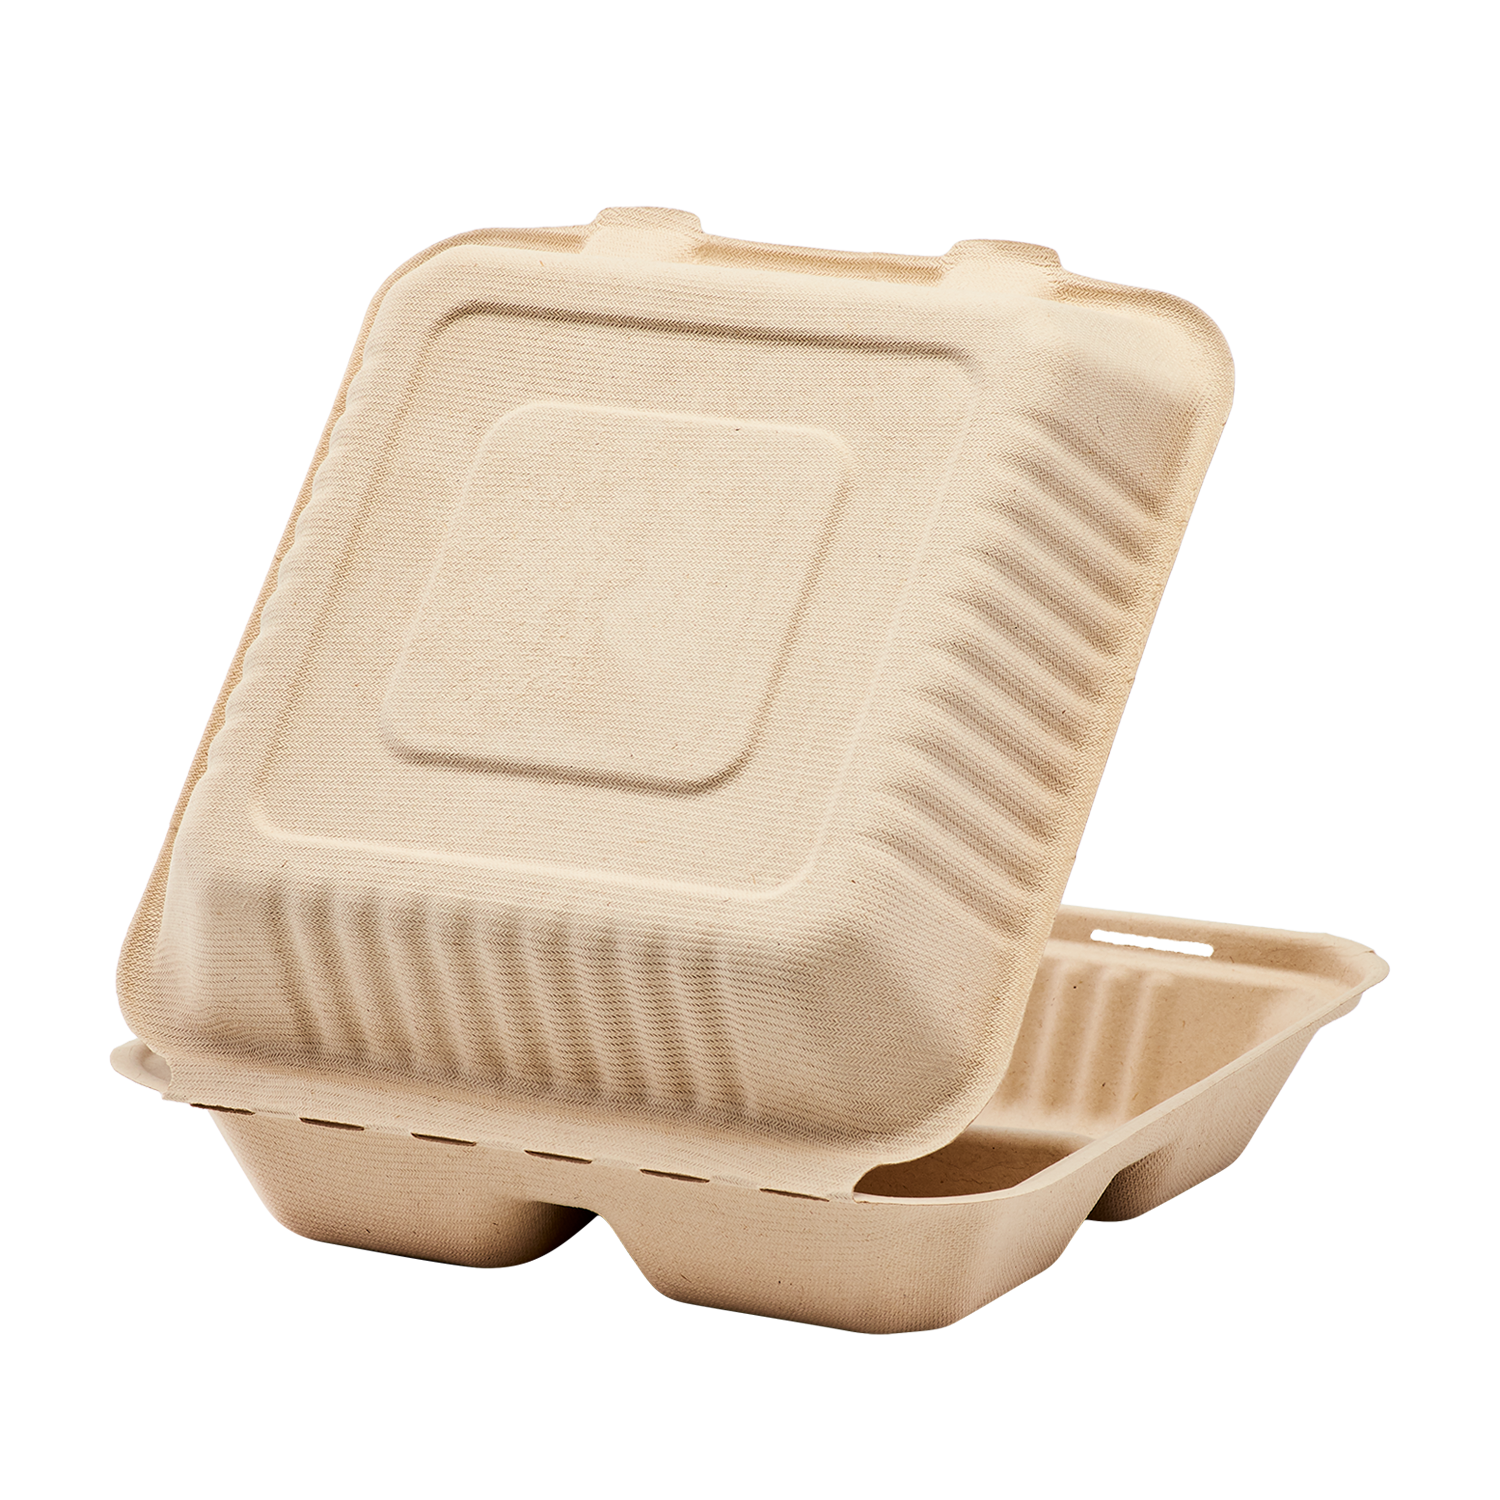 3 compartment biodegradable takeaway food box with lid - Buy